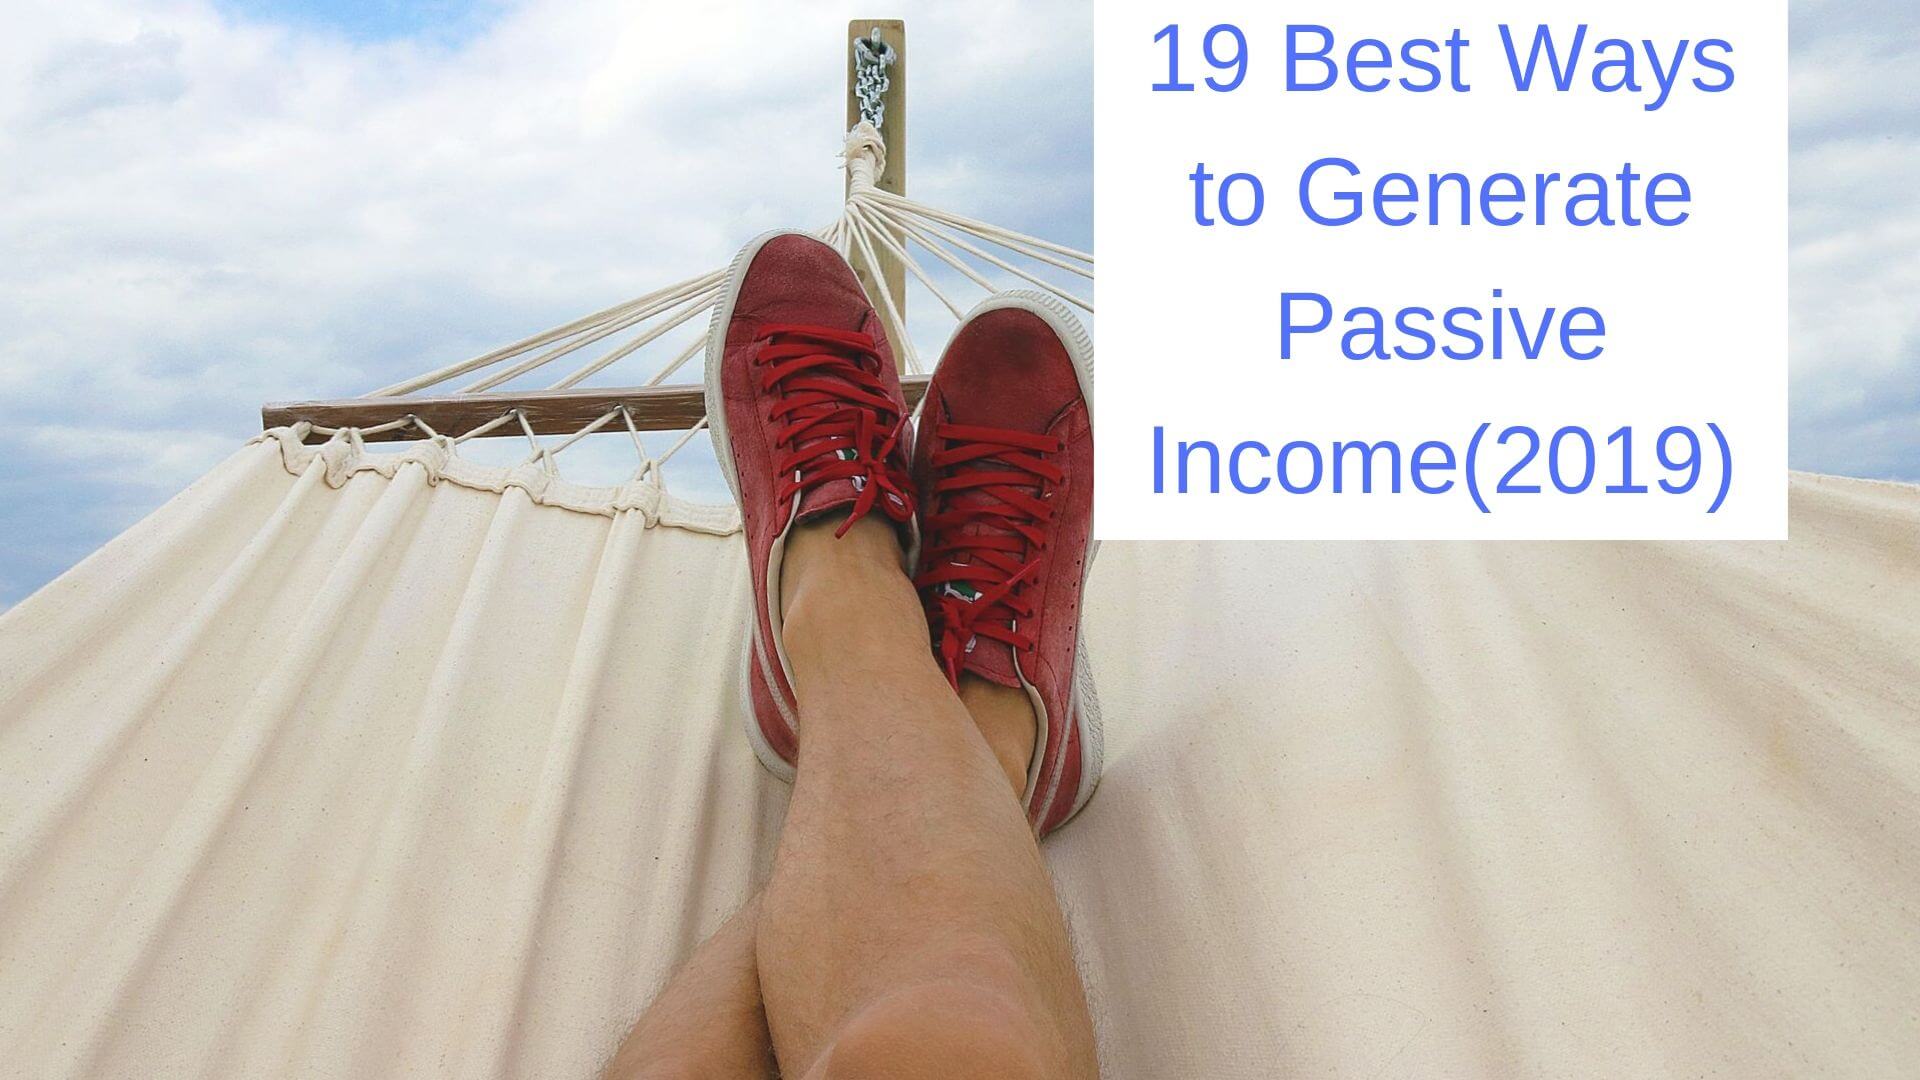 19 Best Ways to Generate Passive Income in 2019